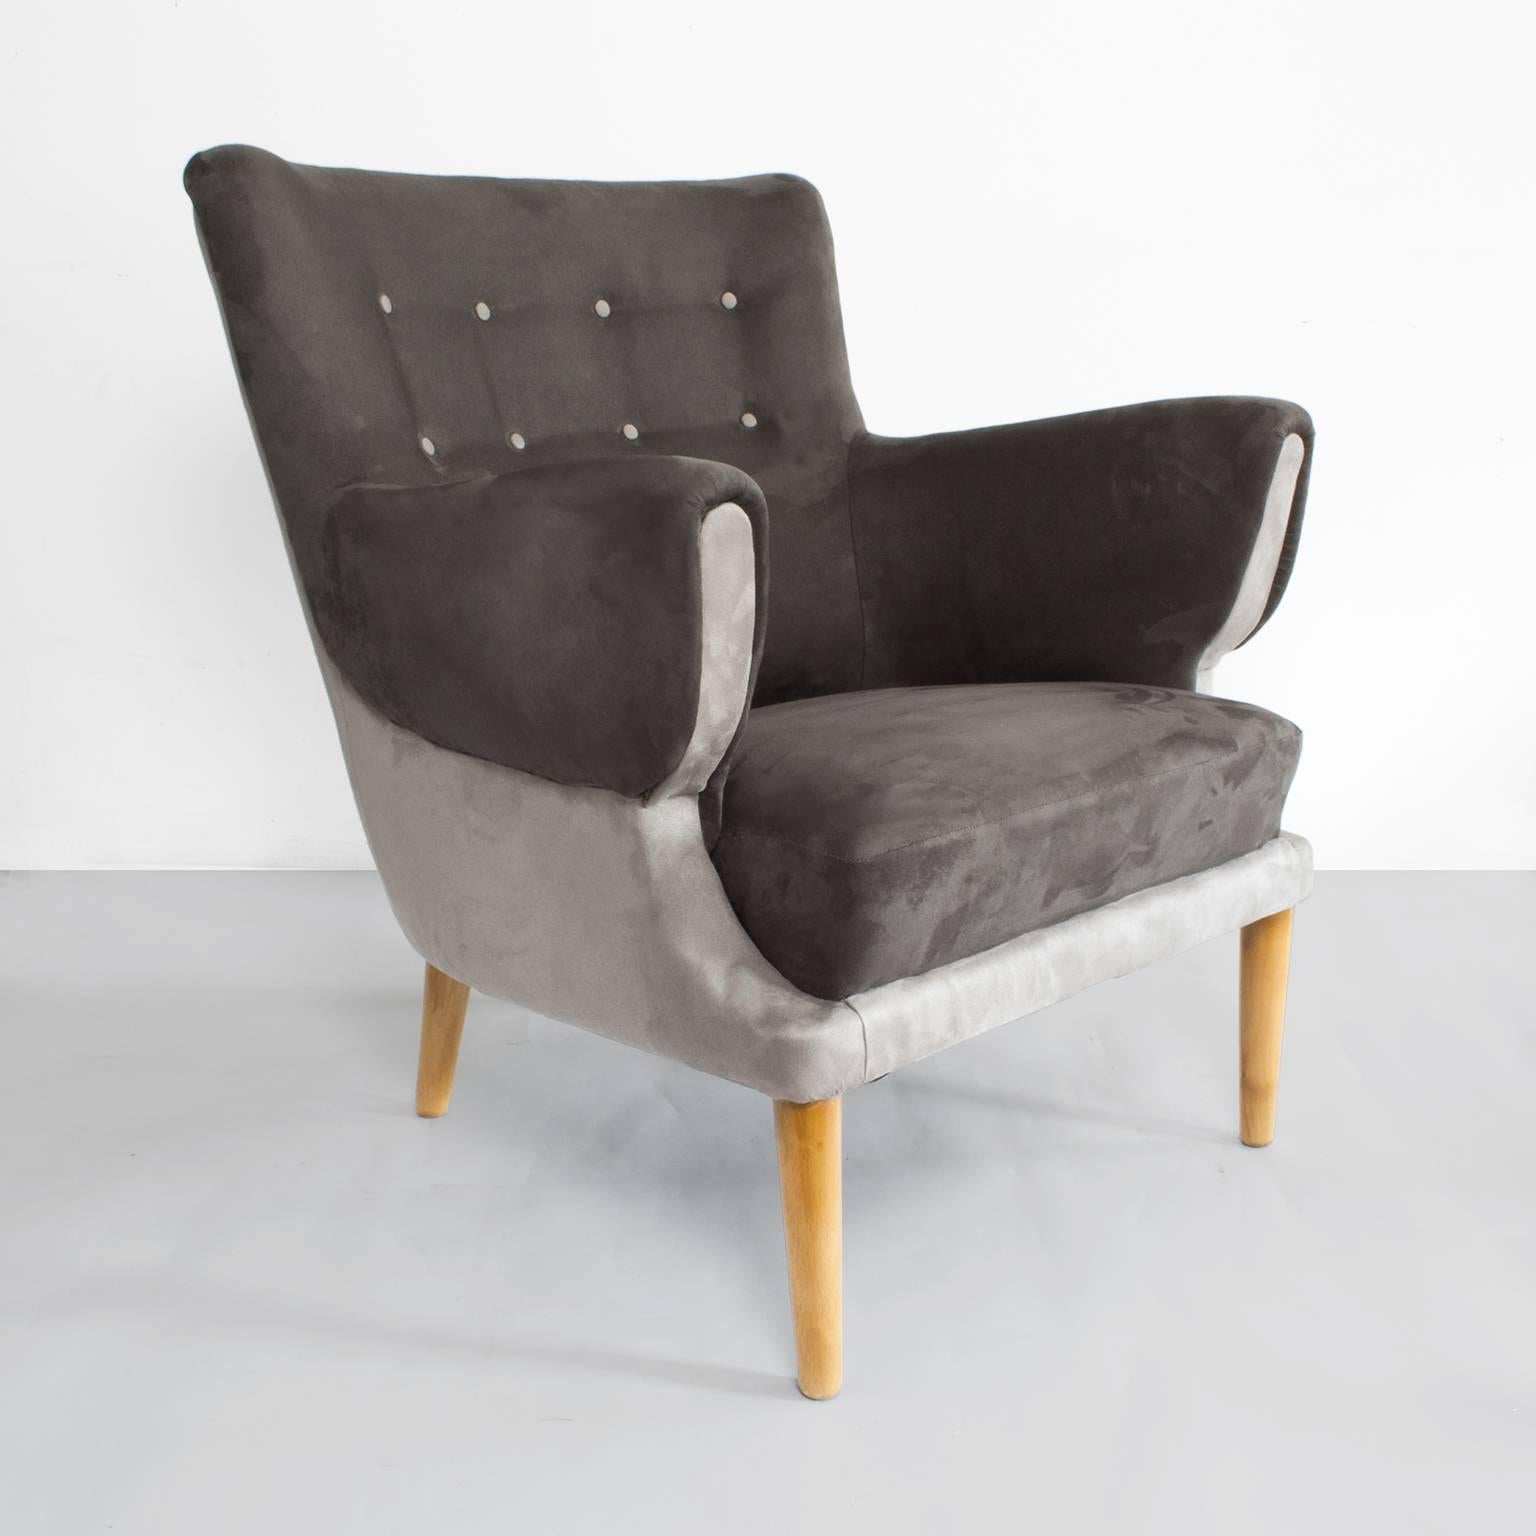 Scandinavian Modern (Danish) lounge chair newly restored and re-upholstered in two shades of gray ultra-suede fabric. The chair has contrasting tufted buttons on the backrest and polished solid beechwood dowel legs. 
Measures: Height 31.5